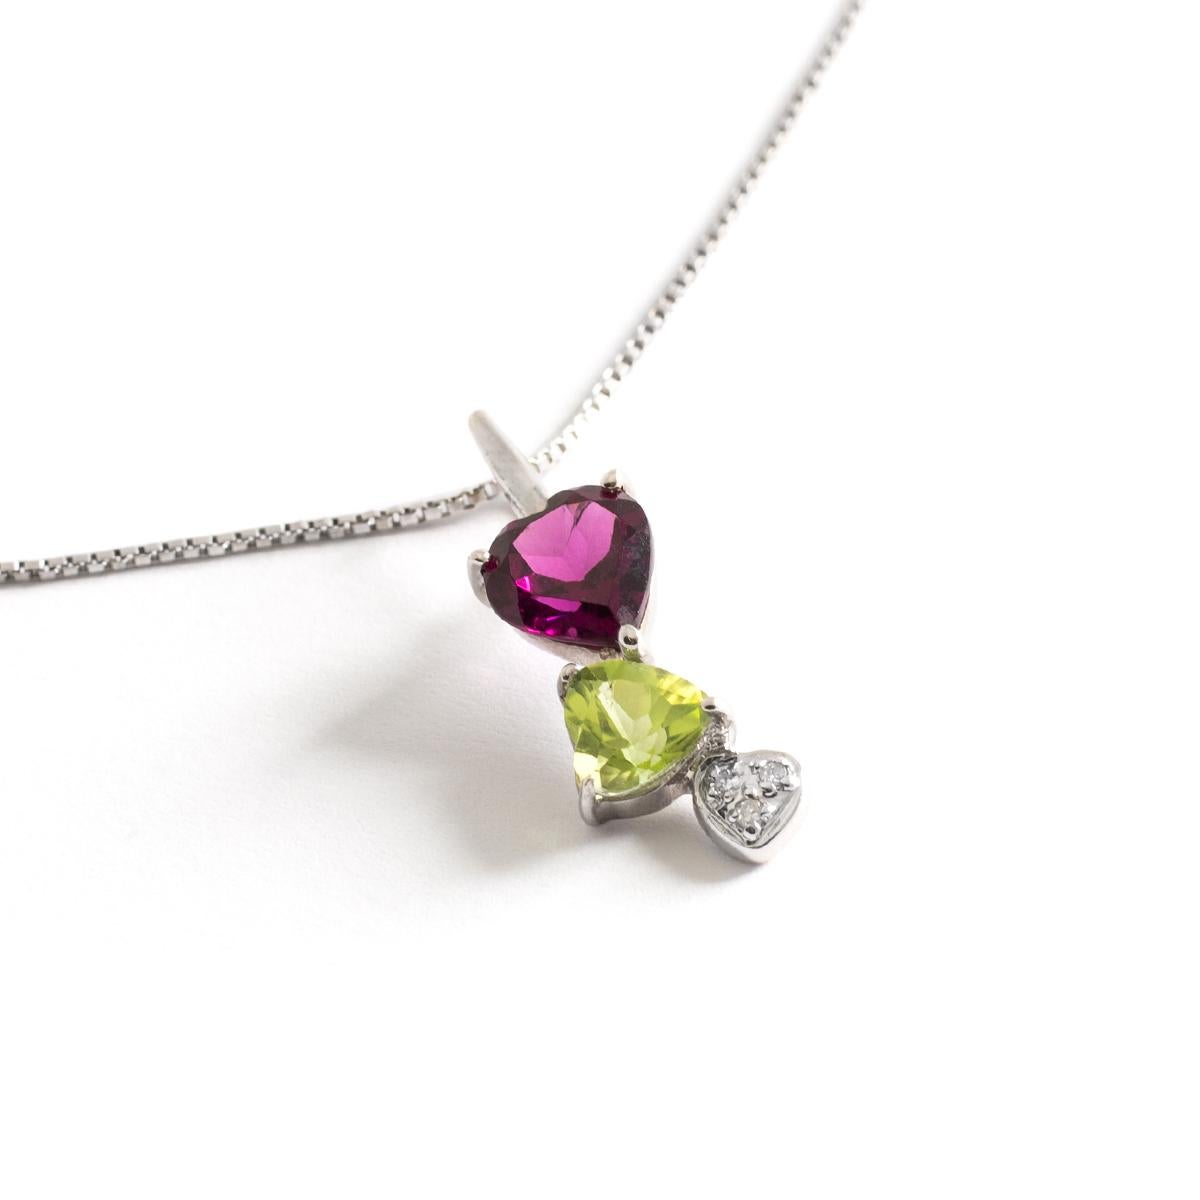 Amethyst heart shape length: 5.39 millimeters.
Peridot heart shape length: 5.68 millimeters.
Pendant length: 2.00 centimeters.
Chain length: approximately 43.00 centimeters.
Gross weight: 2.96 grams.